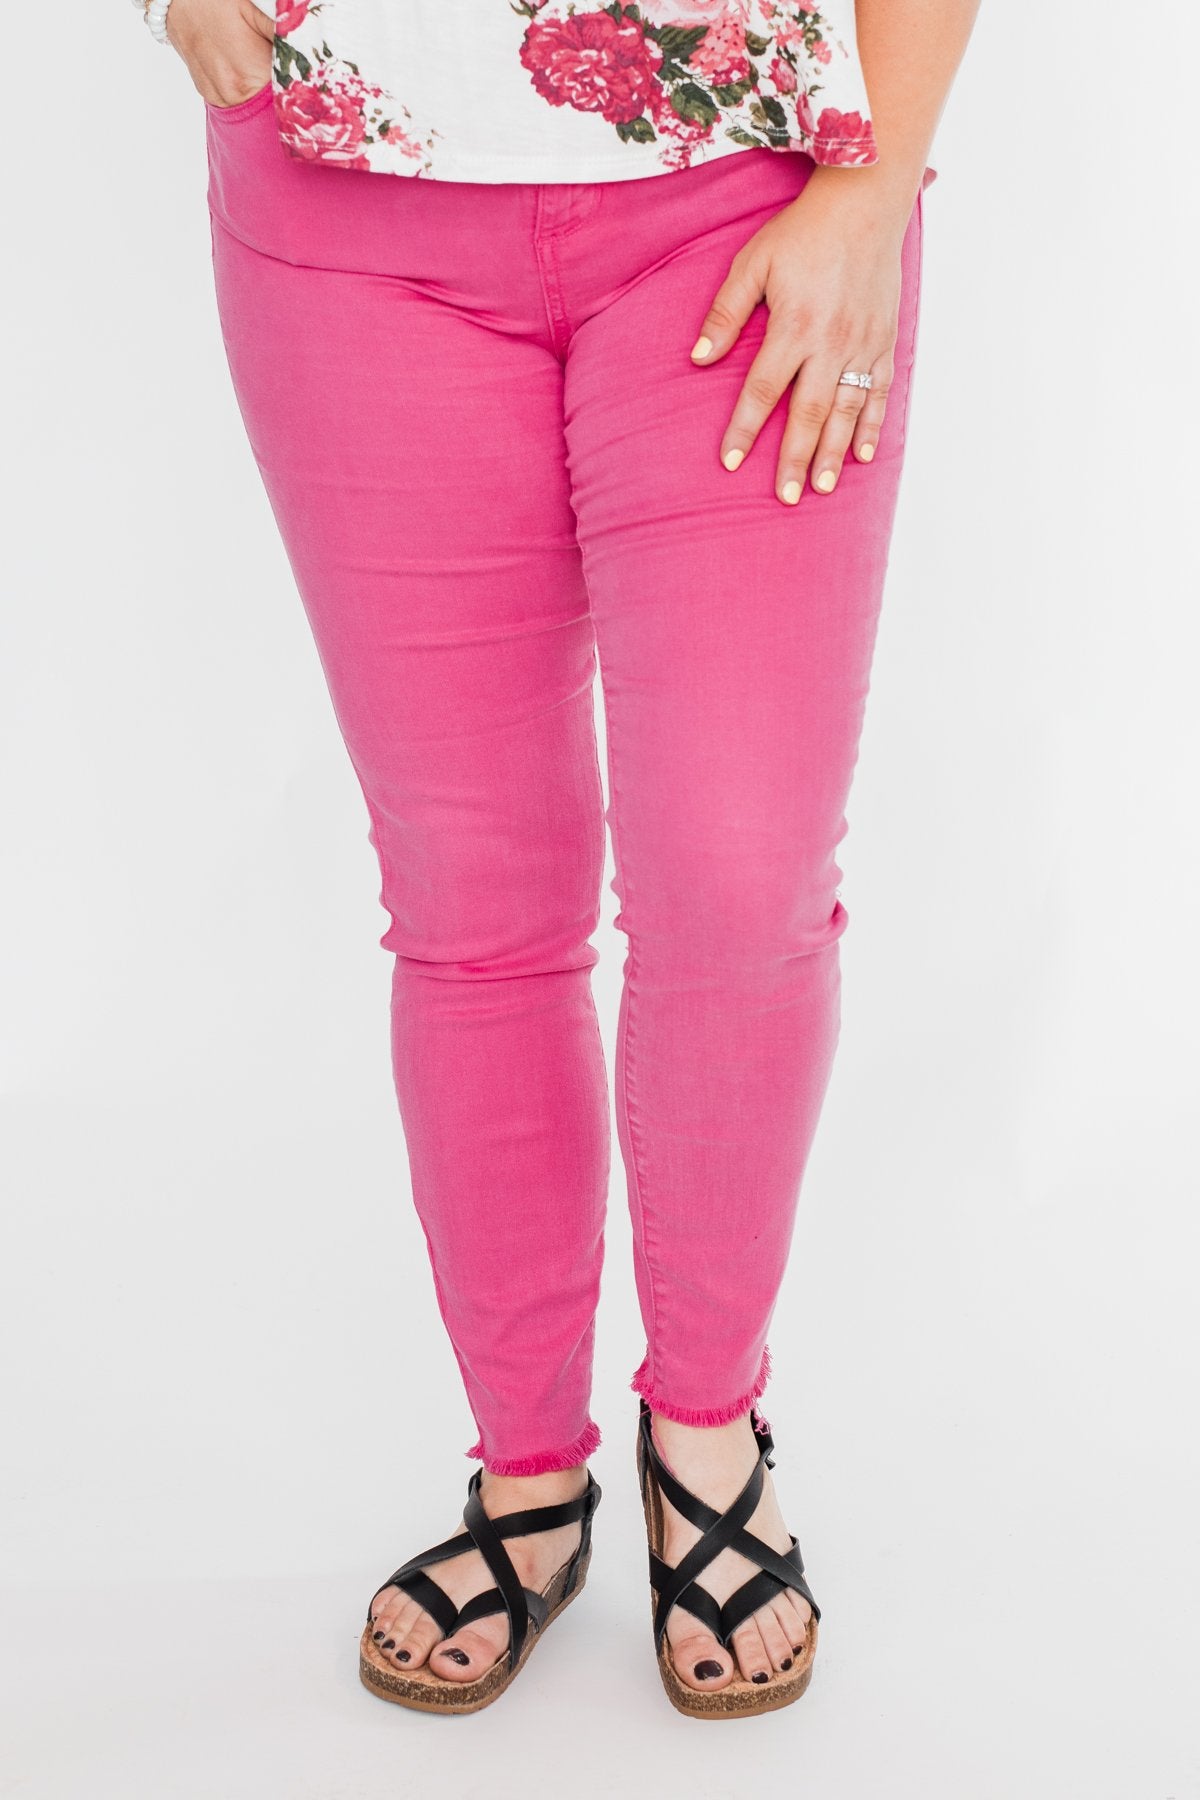 Cello Colored Skinny Jeans- Hot Pink